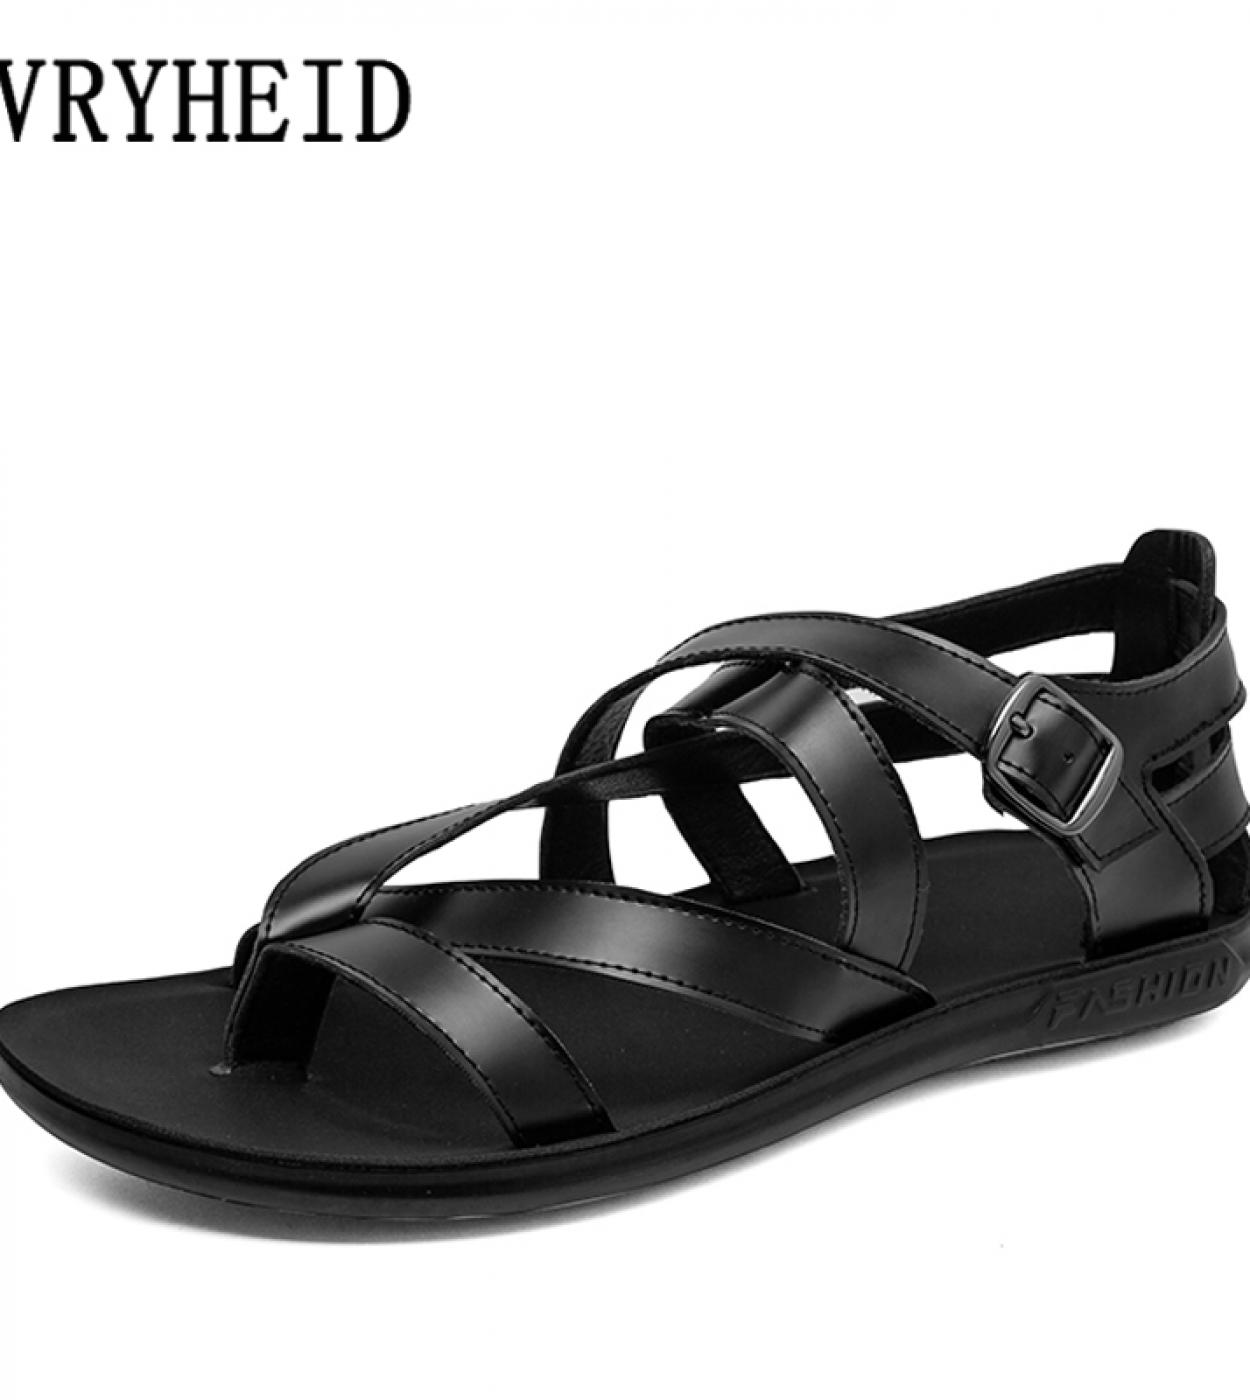 Vryheid 2022 Summer Mens Sandals Leather Luxury Beach Wading Shoes Nonslip Outdoors Sport Casual Fashion Brand Designer